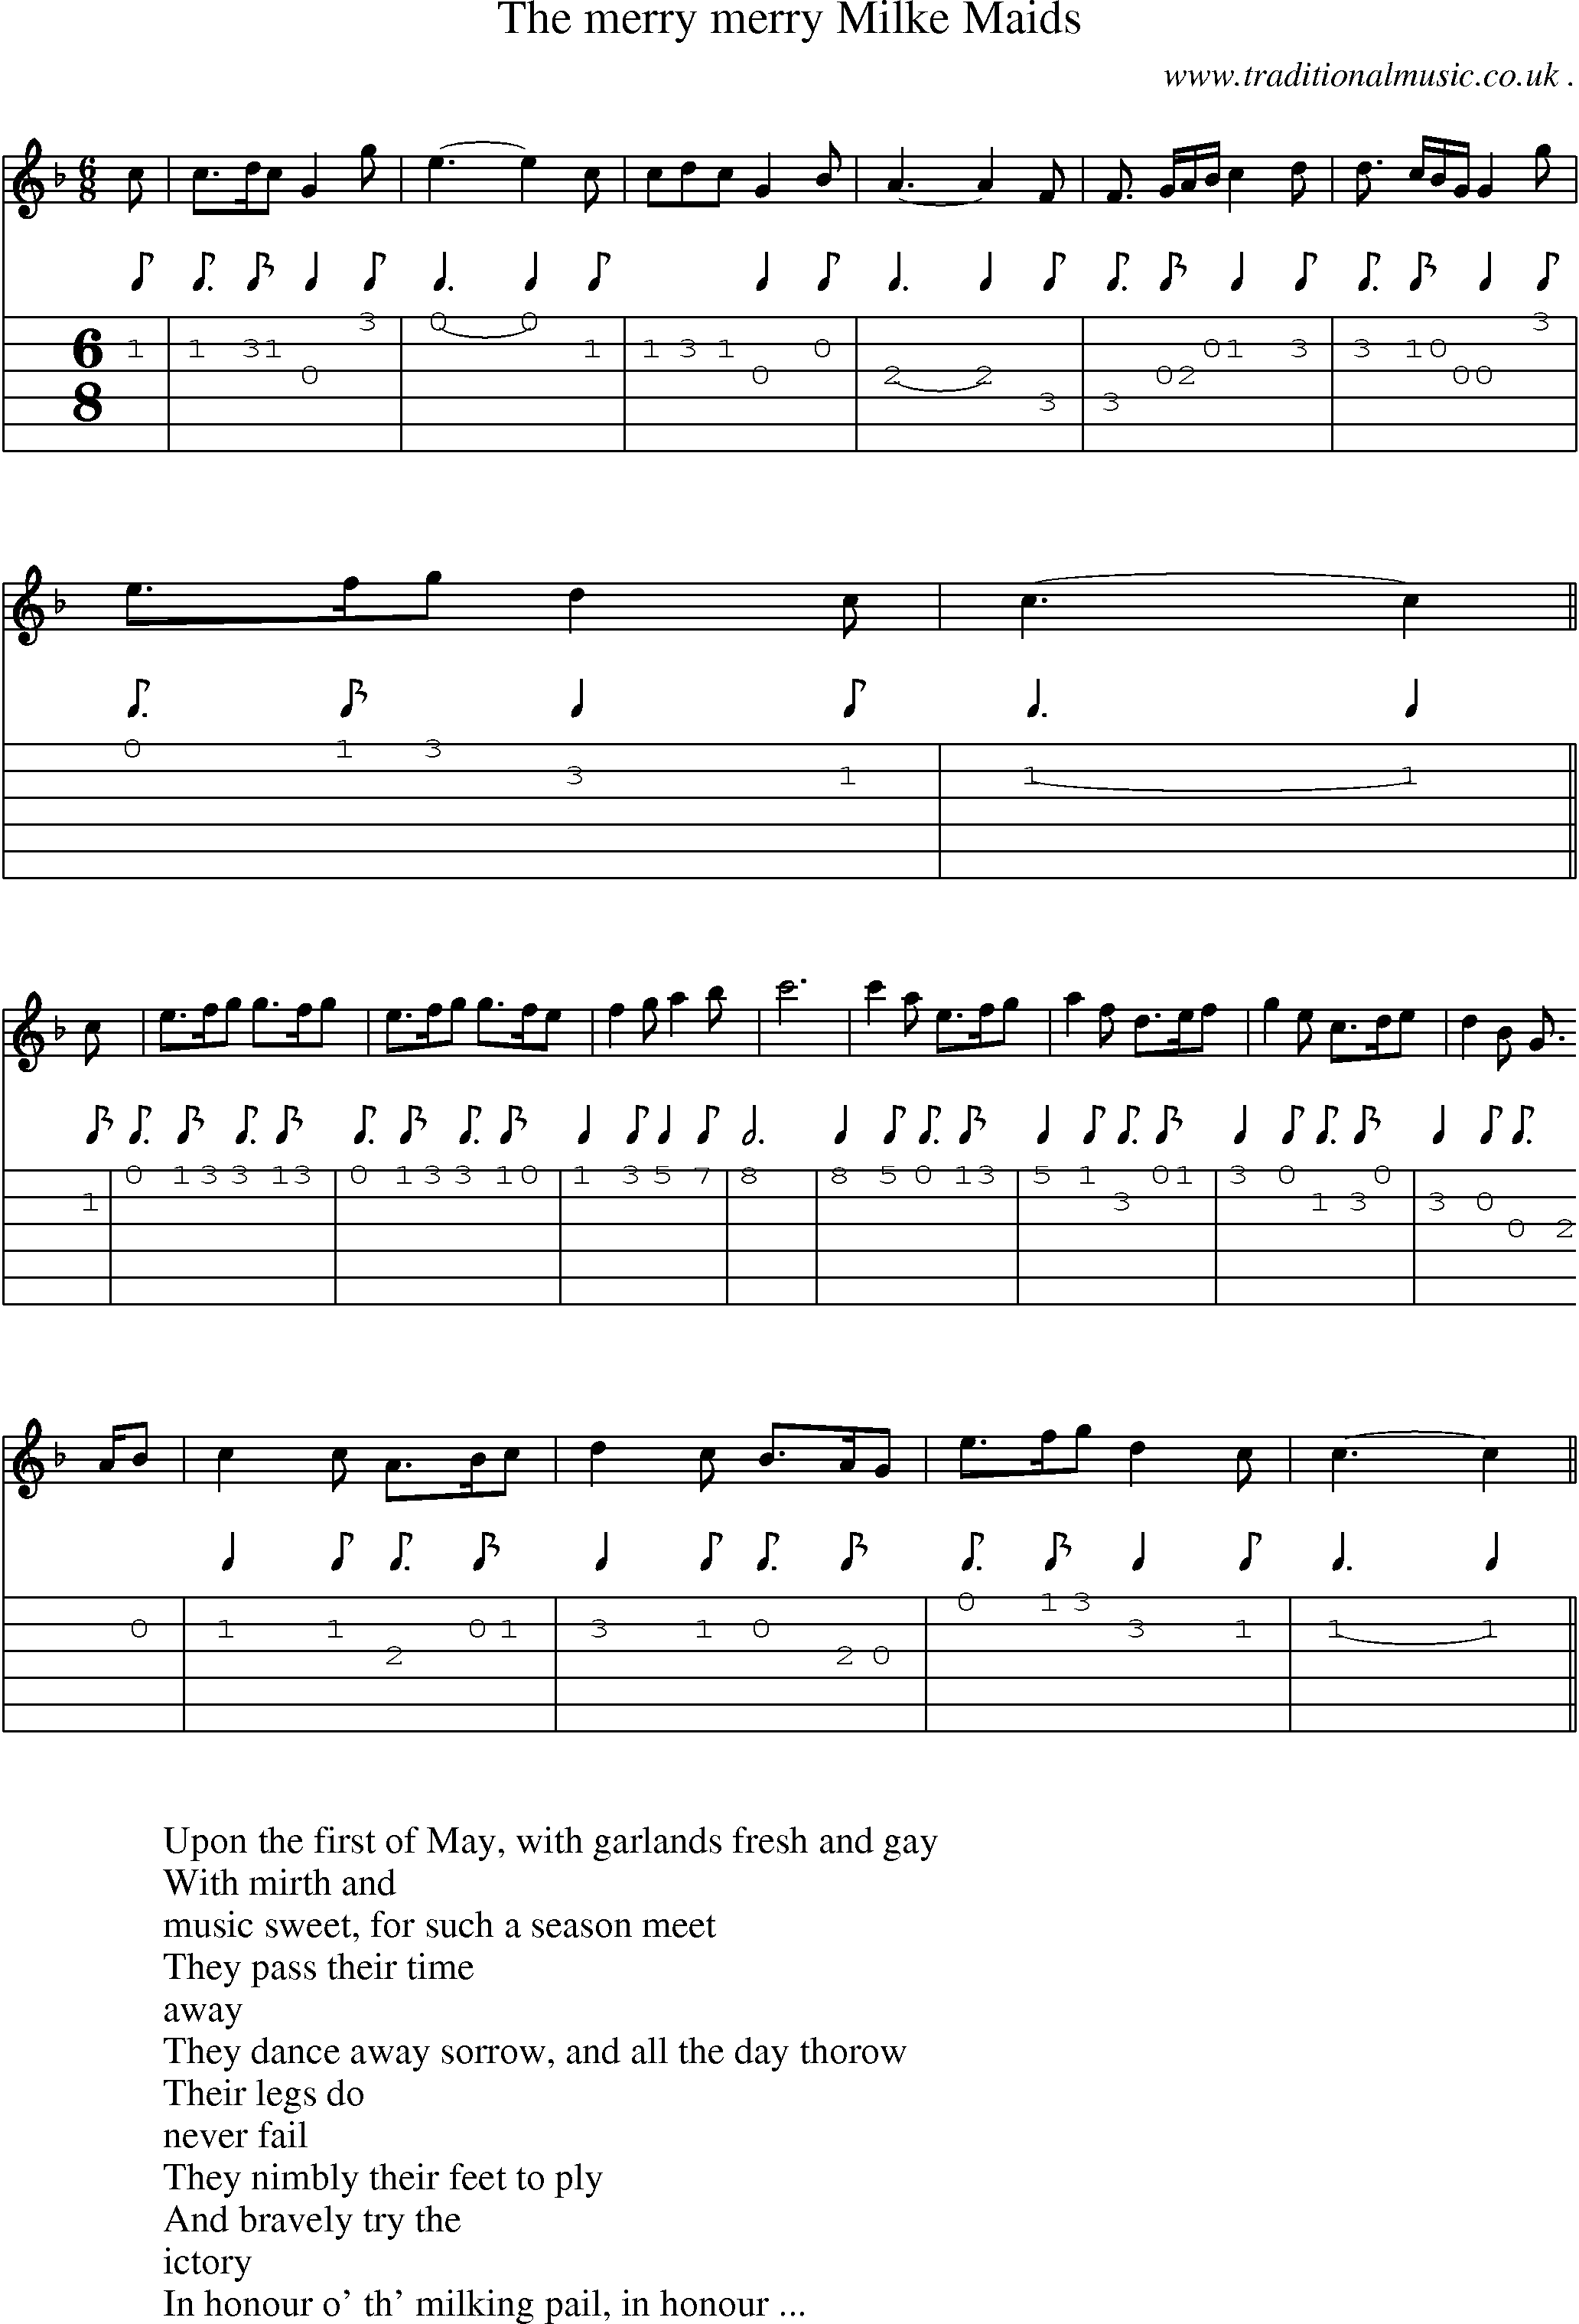 Sheet-Music and Guitar Tabs for The Merry Merry Milke Maids